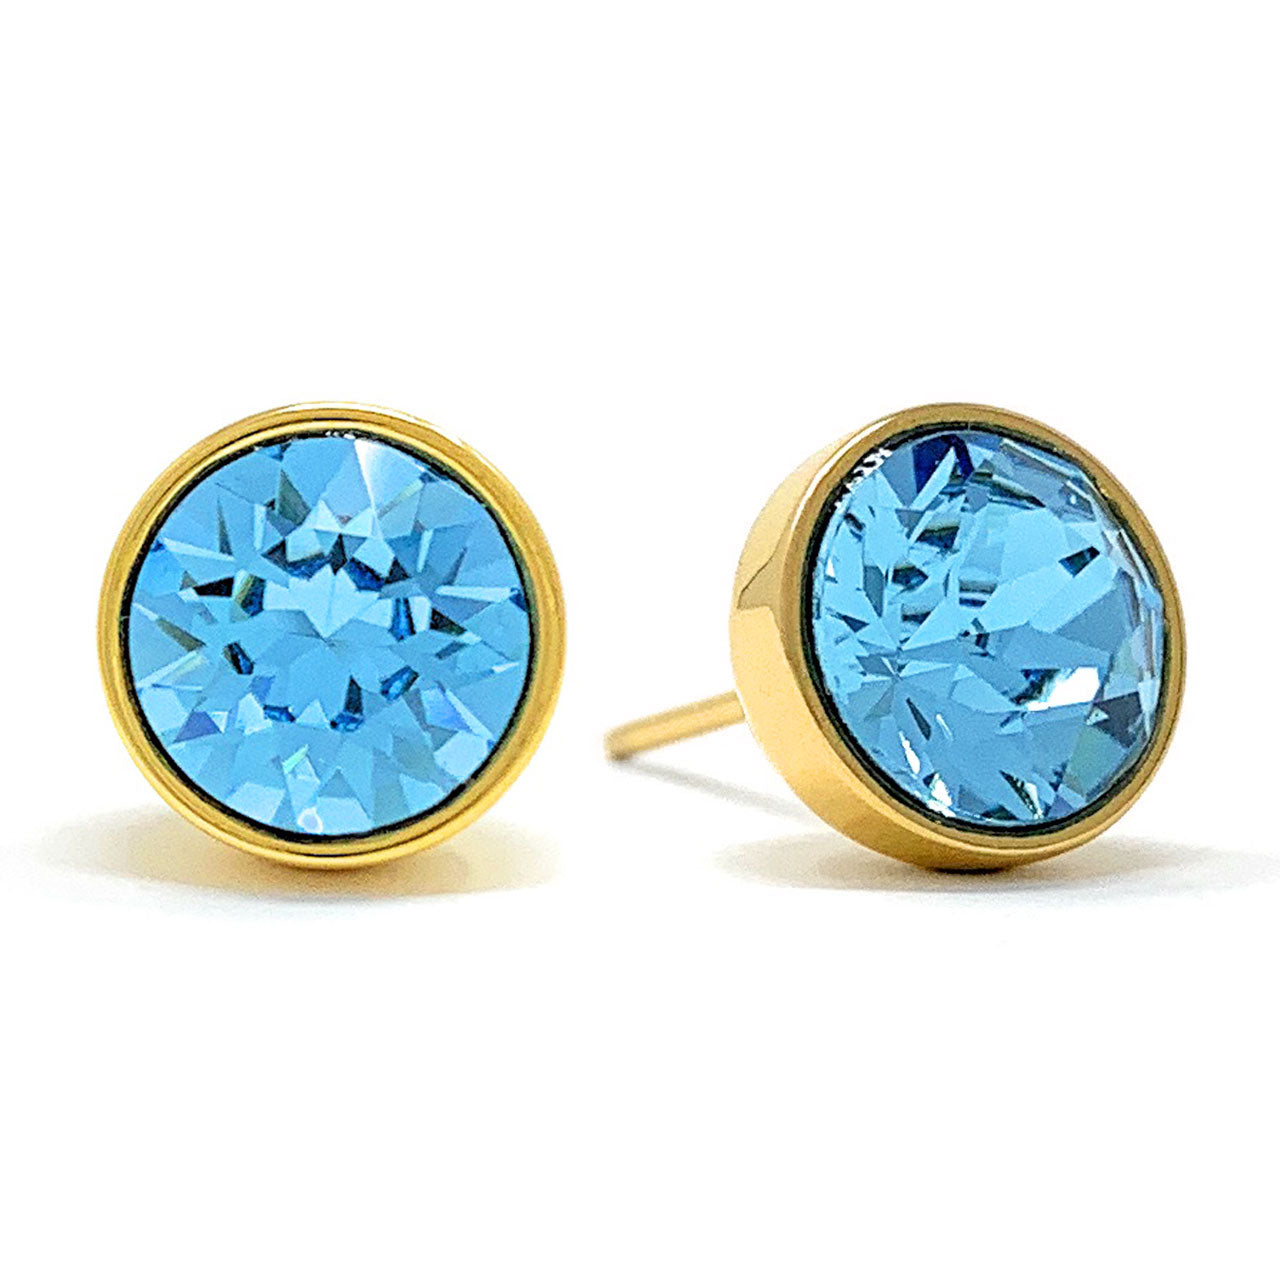 Harley Stud Earrings with Blue Aquamarine Round Crystals from Swarovski Gold Plated - Ed Heart